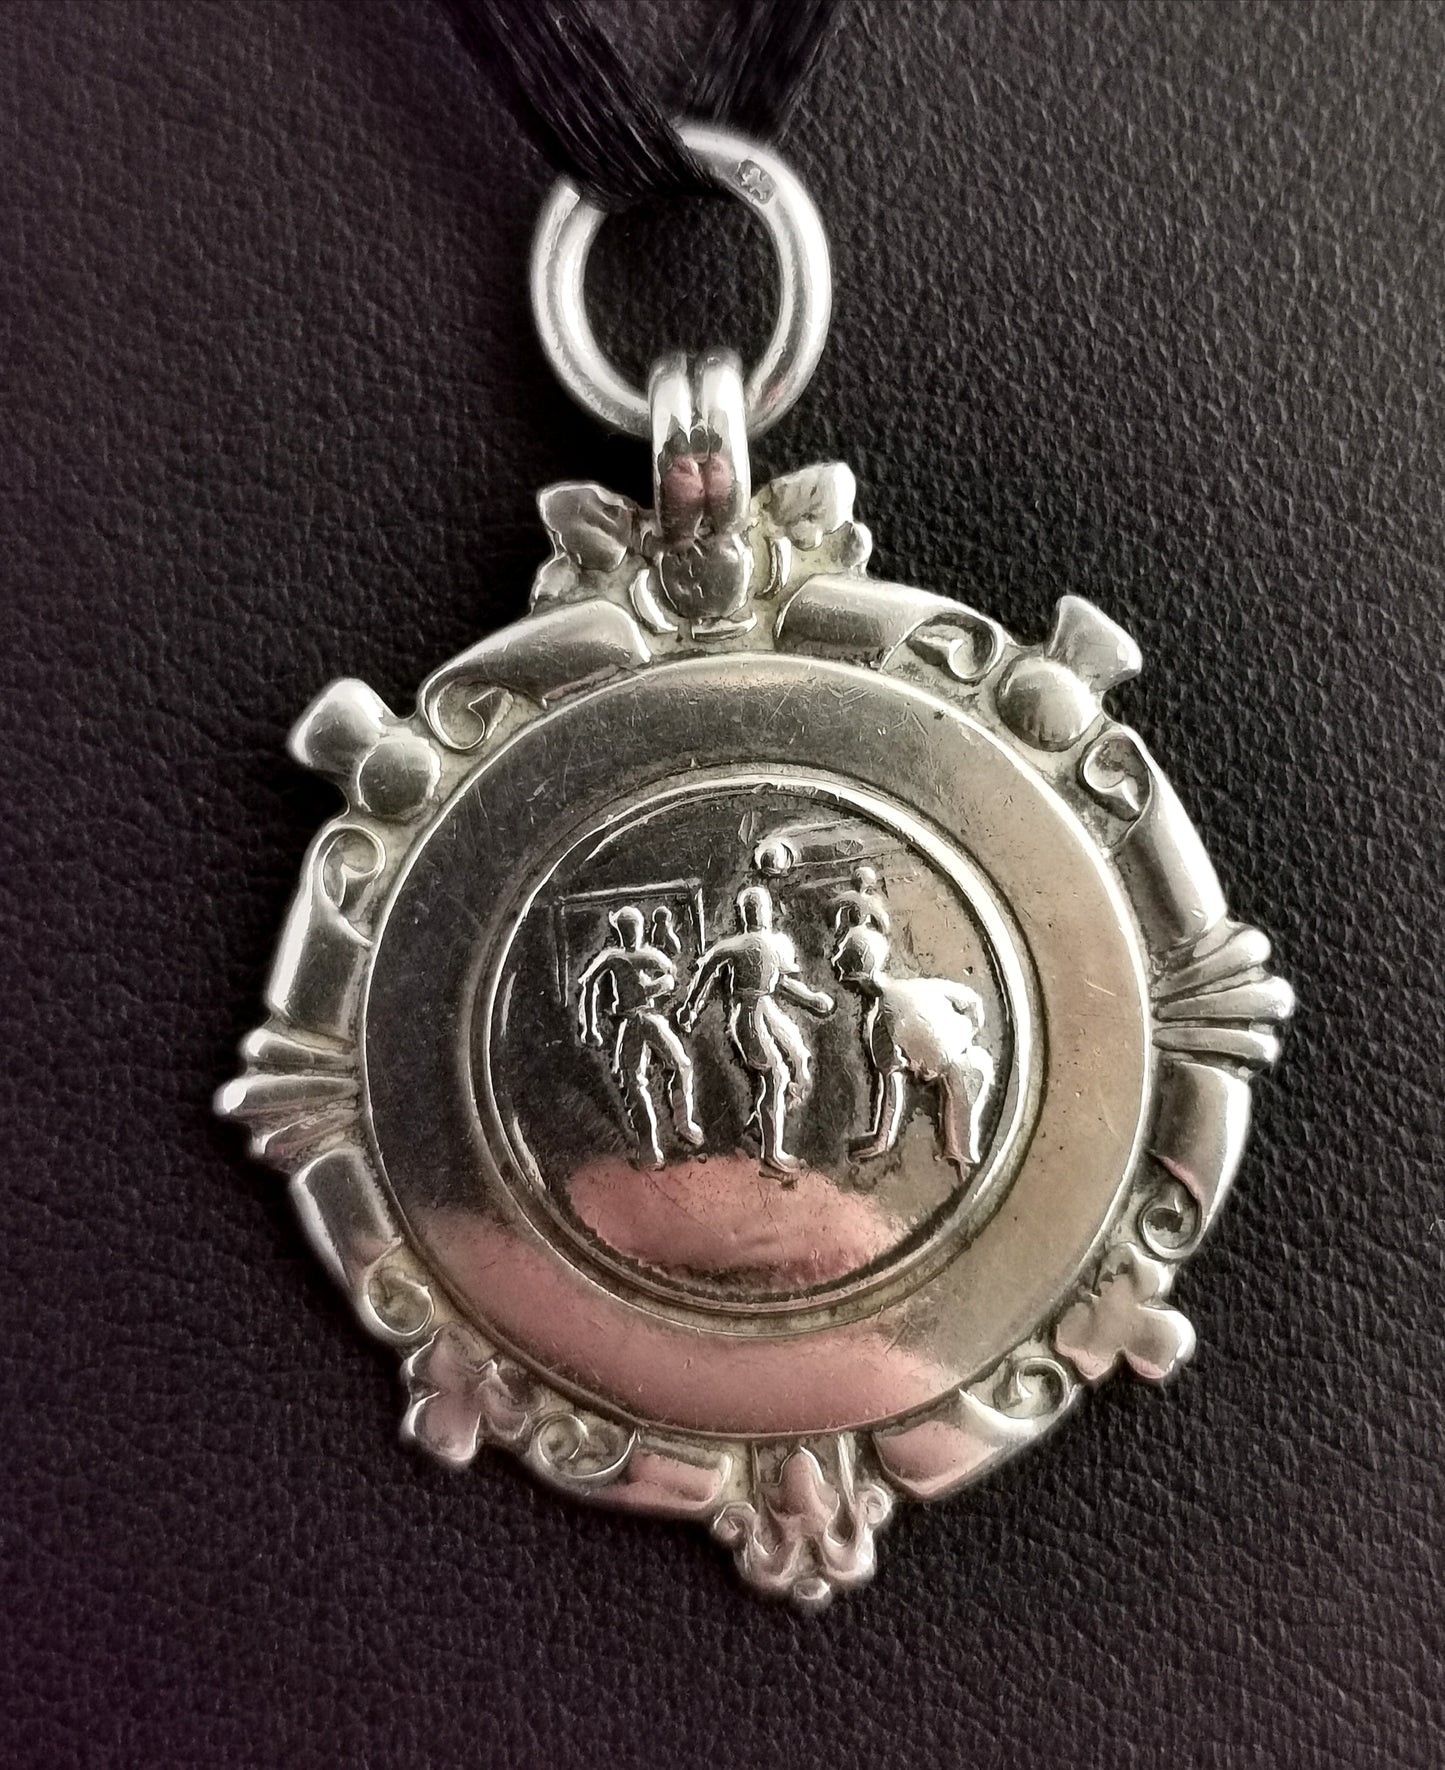 Vintage sterling silver fob pendant, watch fob, Football 1940s